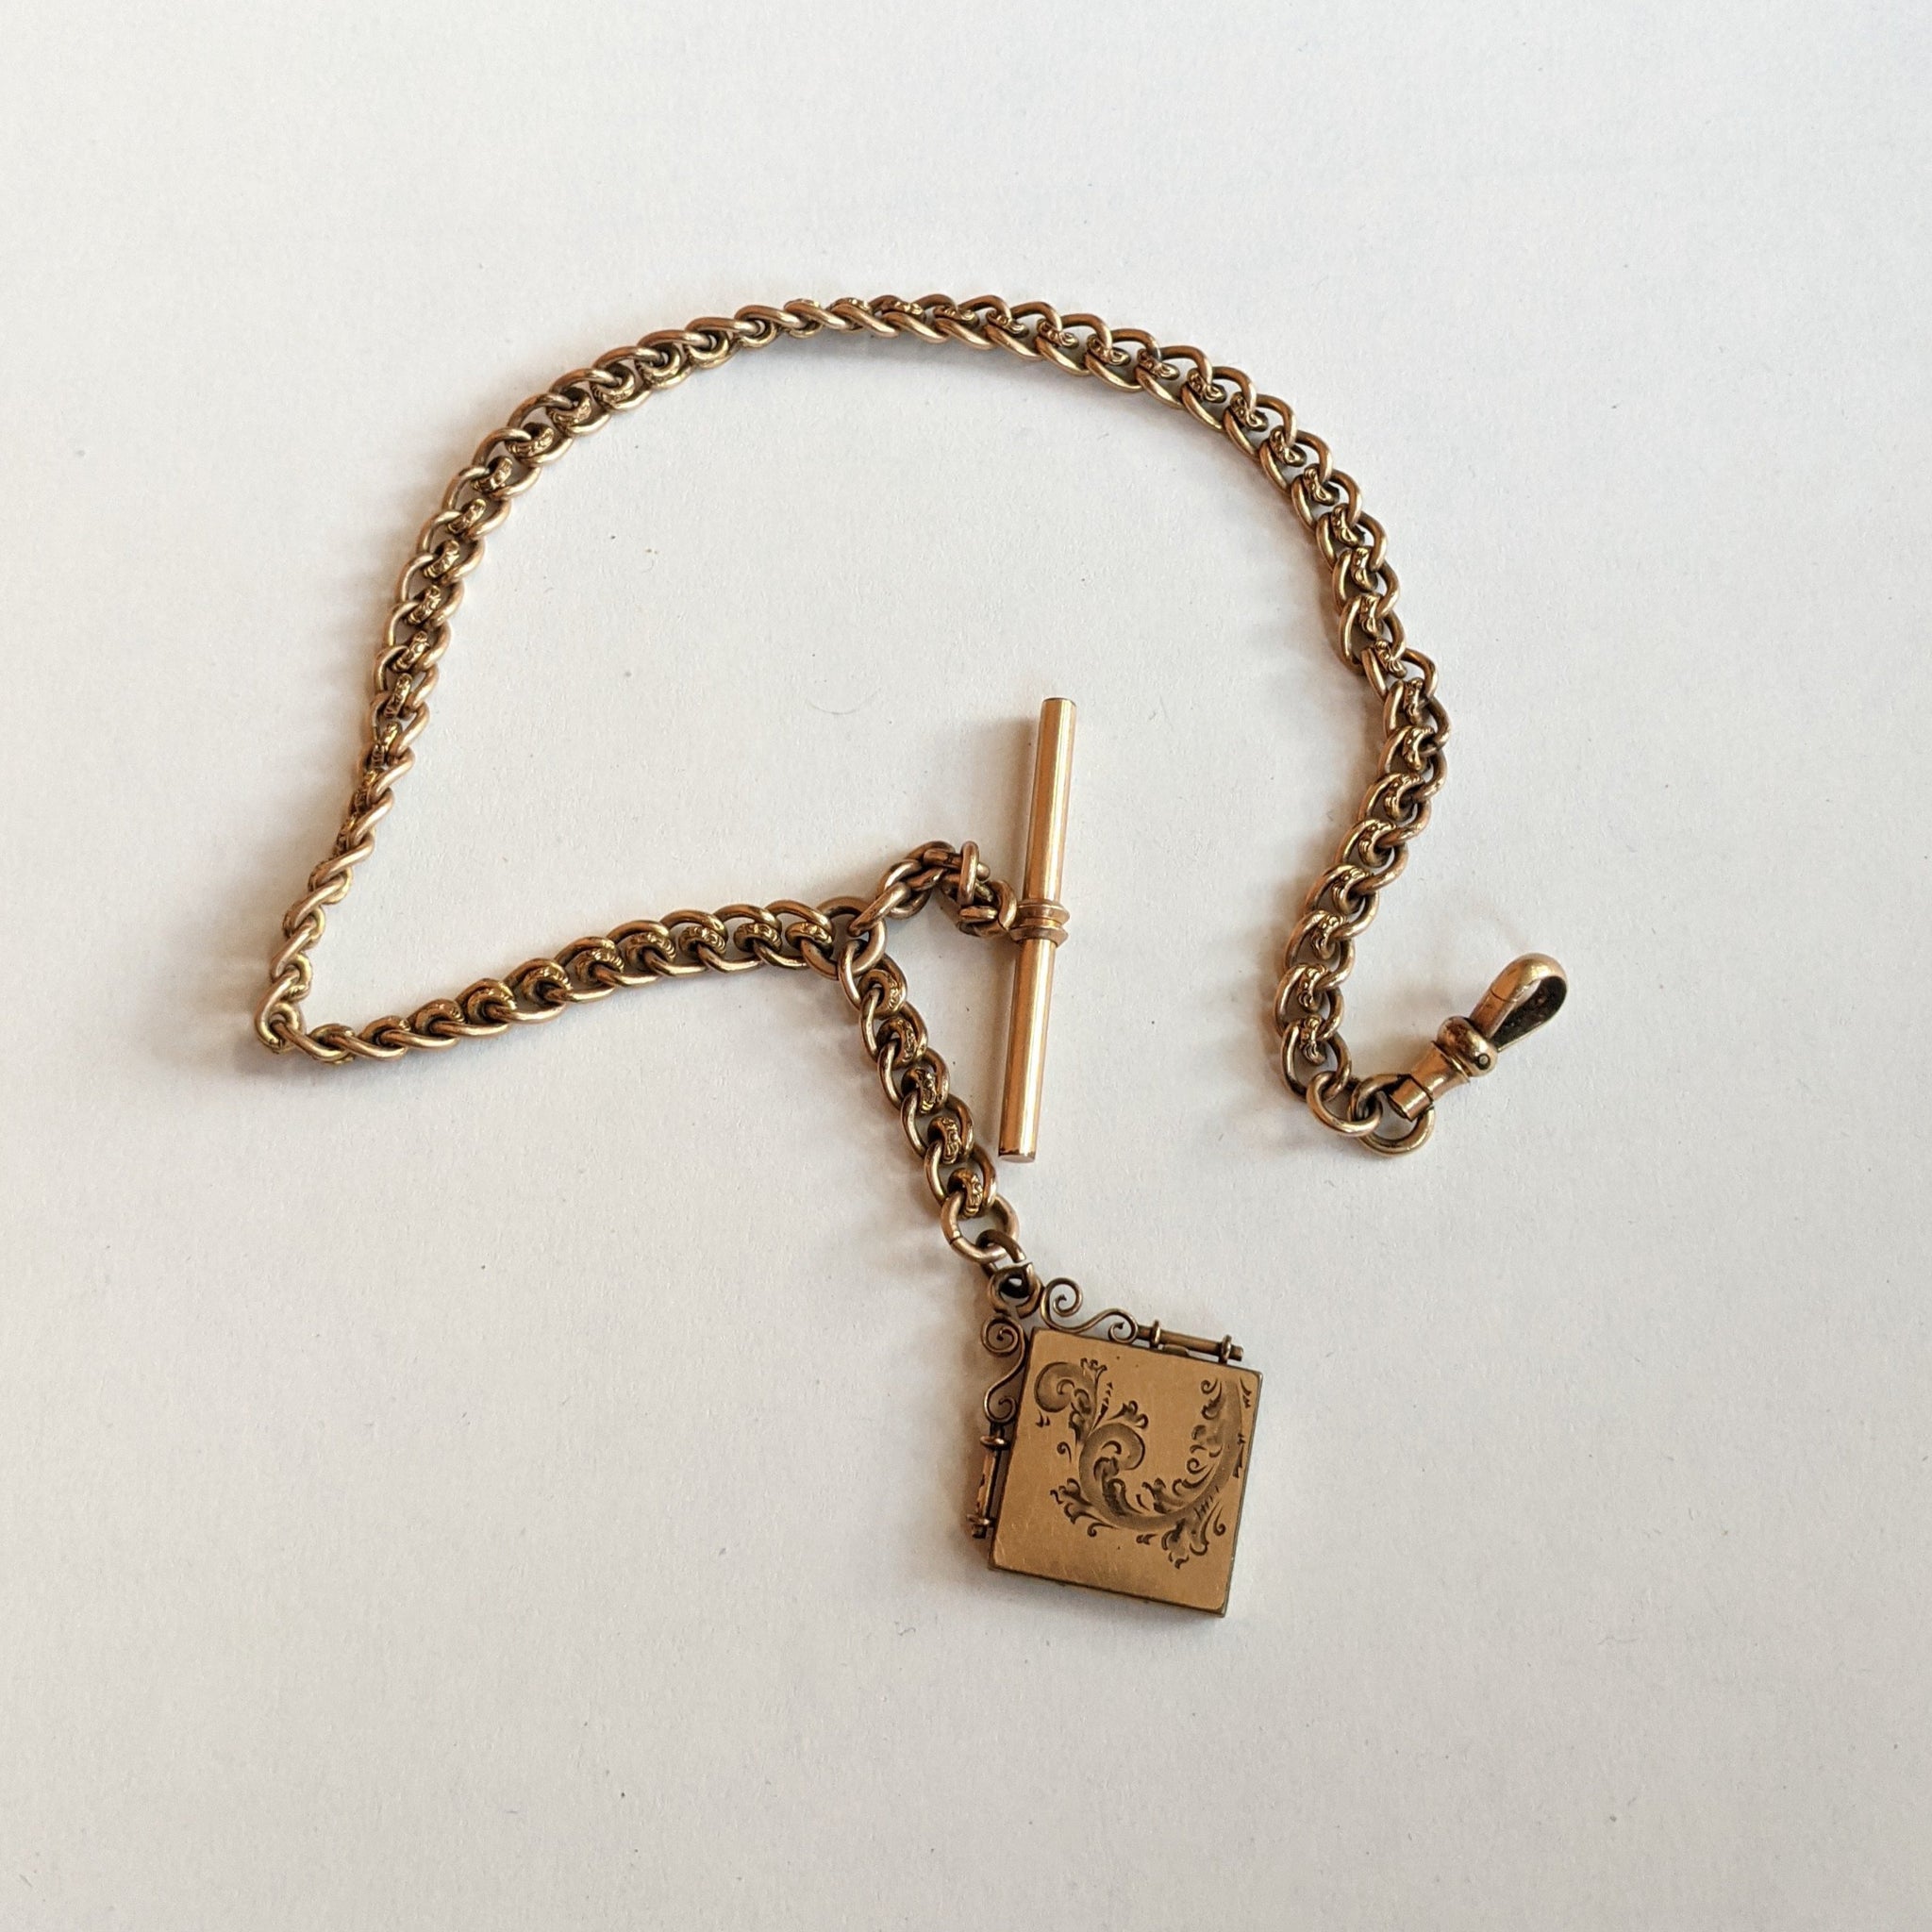 Short T-bar necklace with gold chain